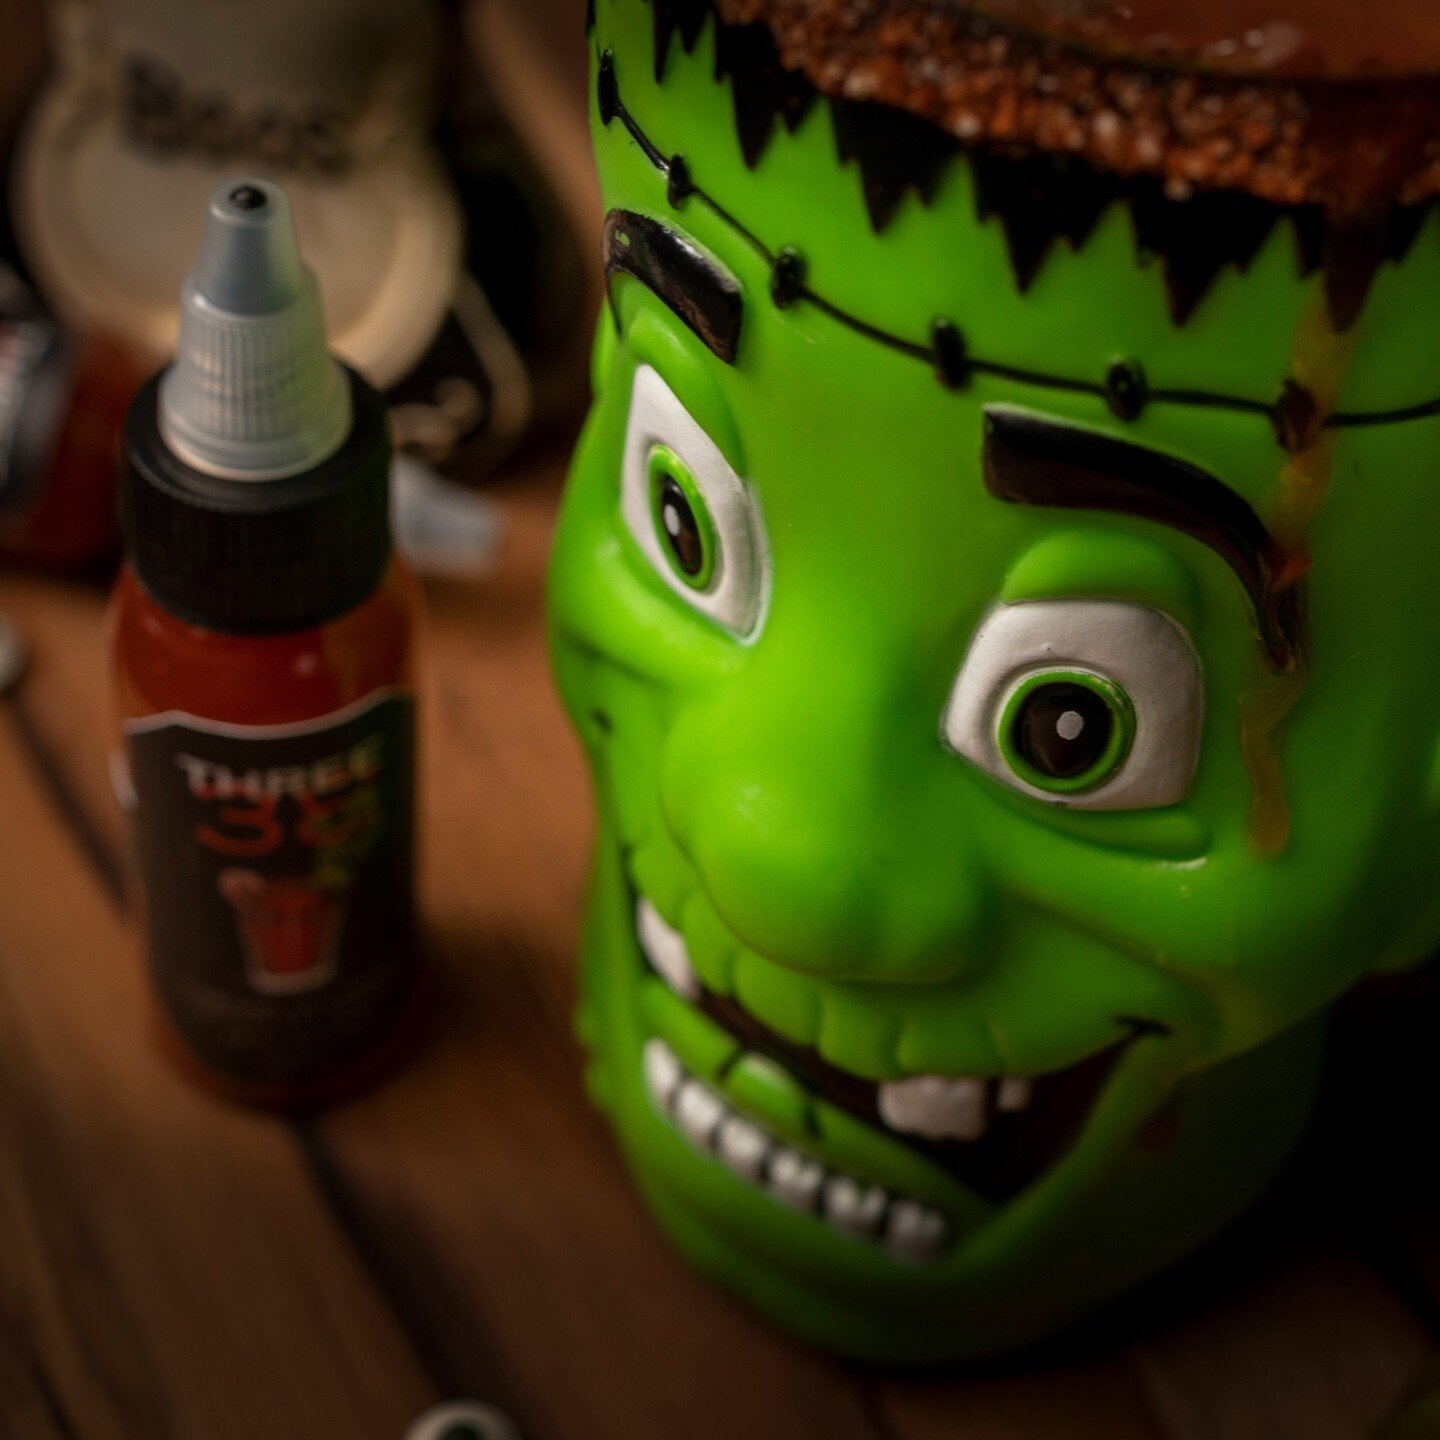 Frank wishes you a happy Halloween! May your Caesars be bloody and your boos be plentyful! 
Stay safe!

#bloodycaesar #caesar #vodka #halloween #scary #frankenstein #bloodymary #bevvy #three38flavorco #caesarsplasher